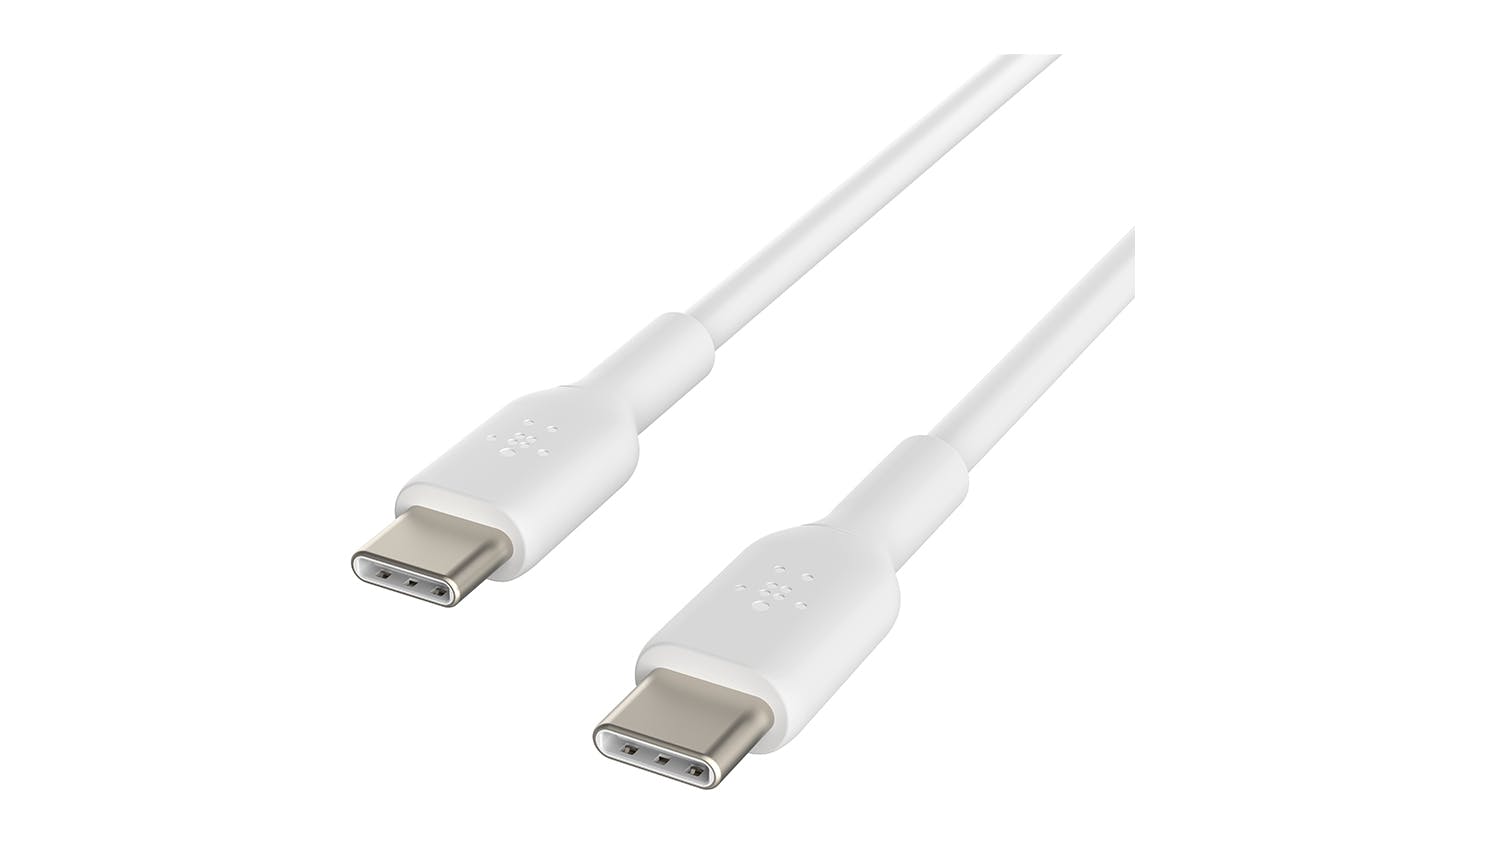 Belkin Boost Up Charge USB-C to USB-C Cable 1m - White